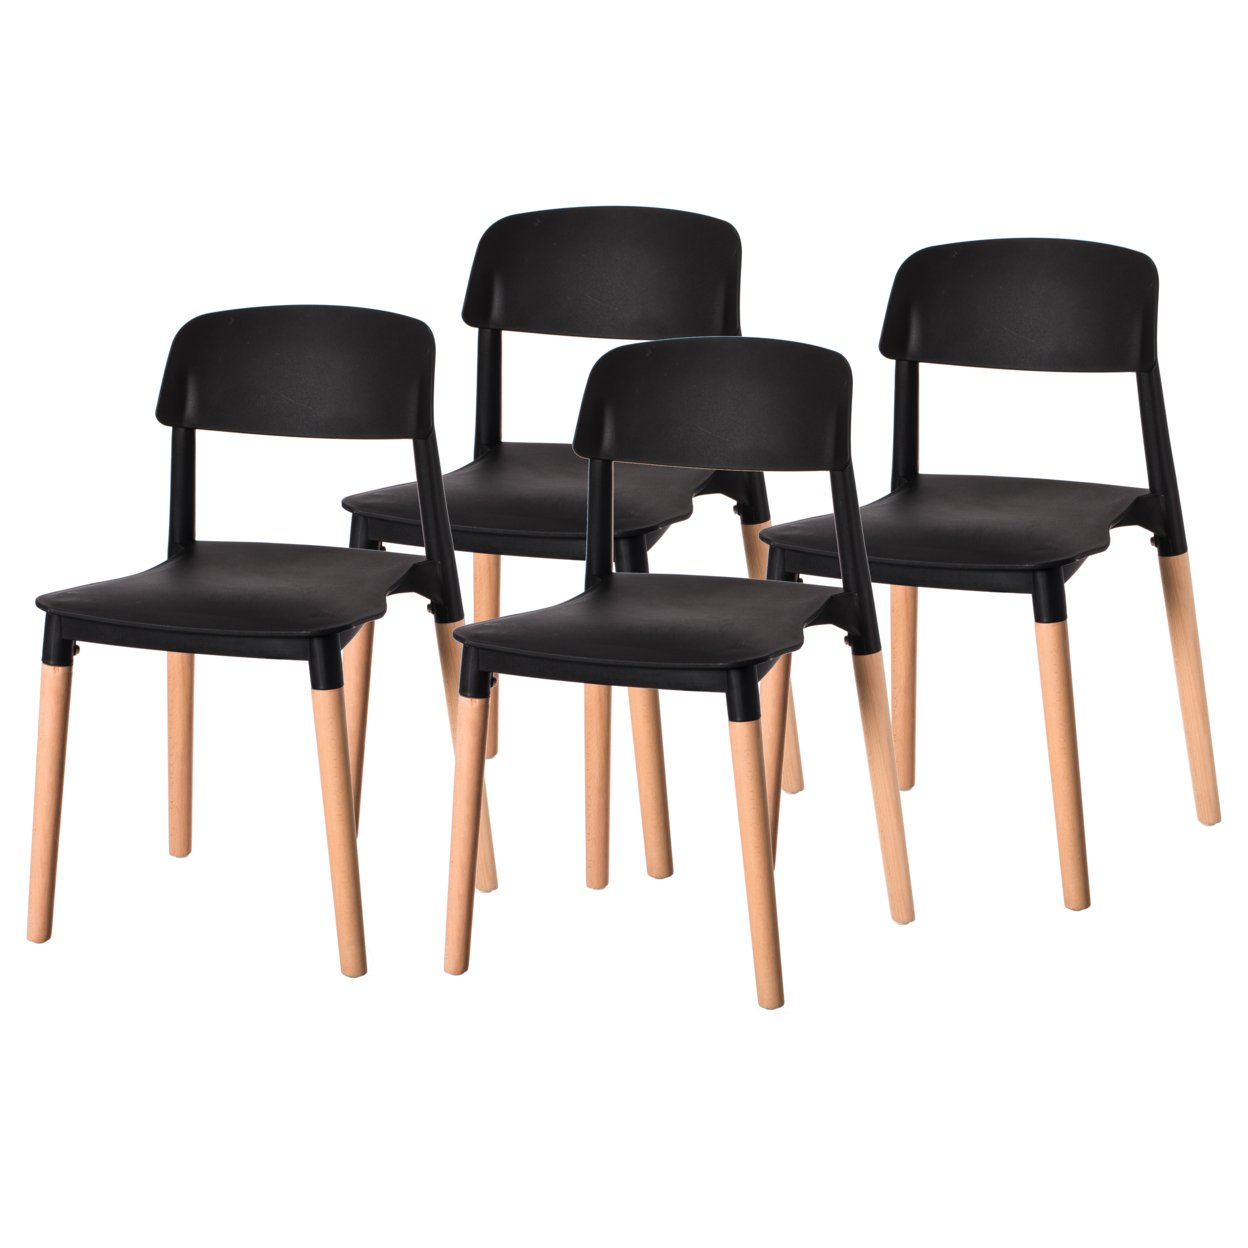 Modern Plastic Dining Chair Open Back With Beech Wood Legs - Set Of 4 Black